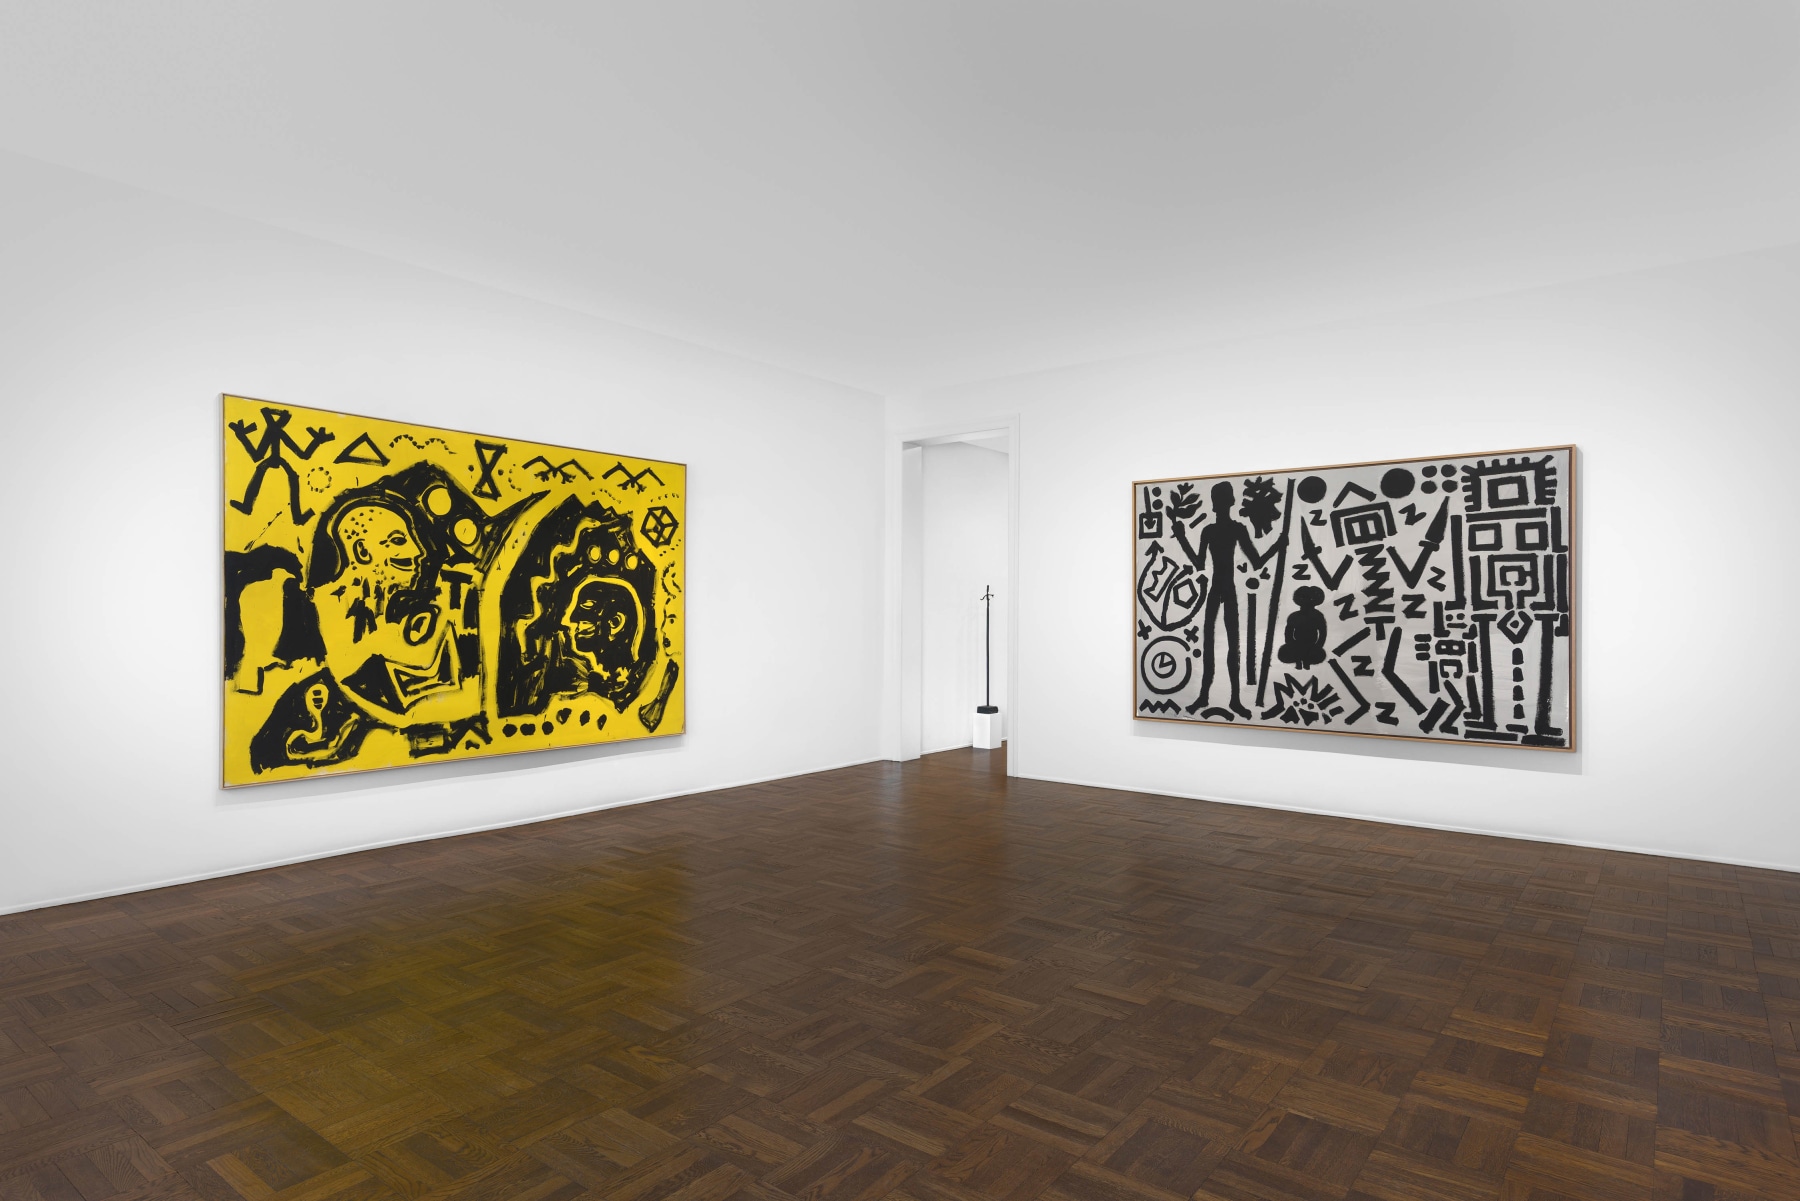 A.R. PENCK, Paintings from the 1980s and Memorial to an Unknown East German Soldier, New York, 2018, Installation Image 4